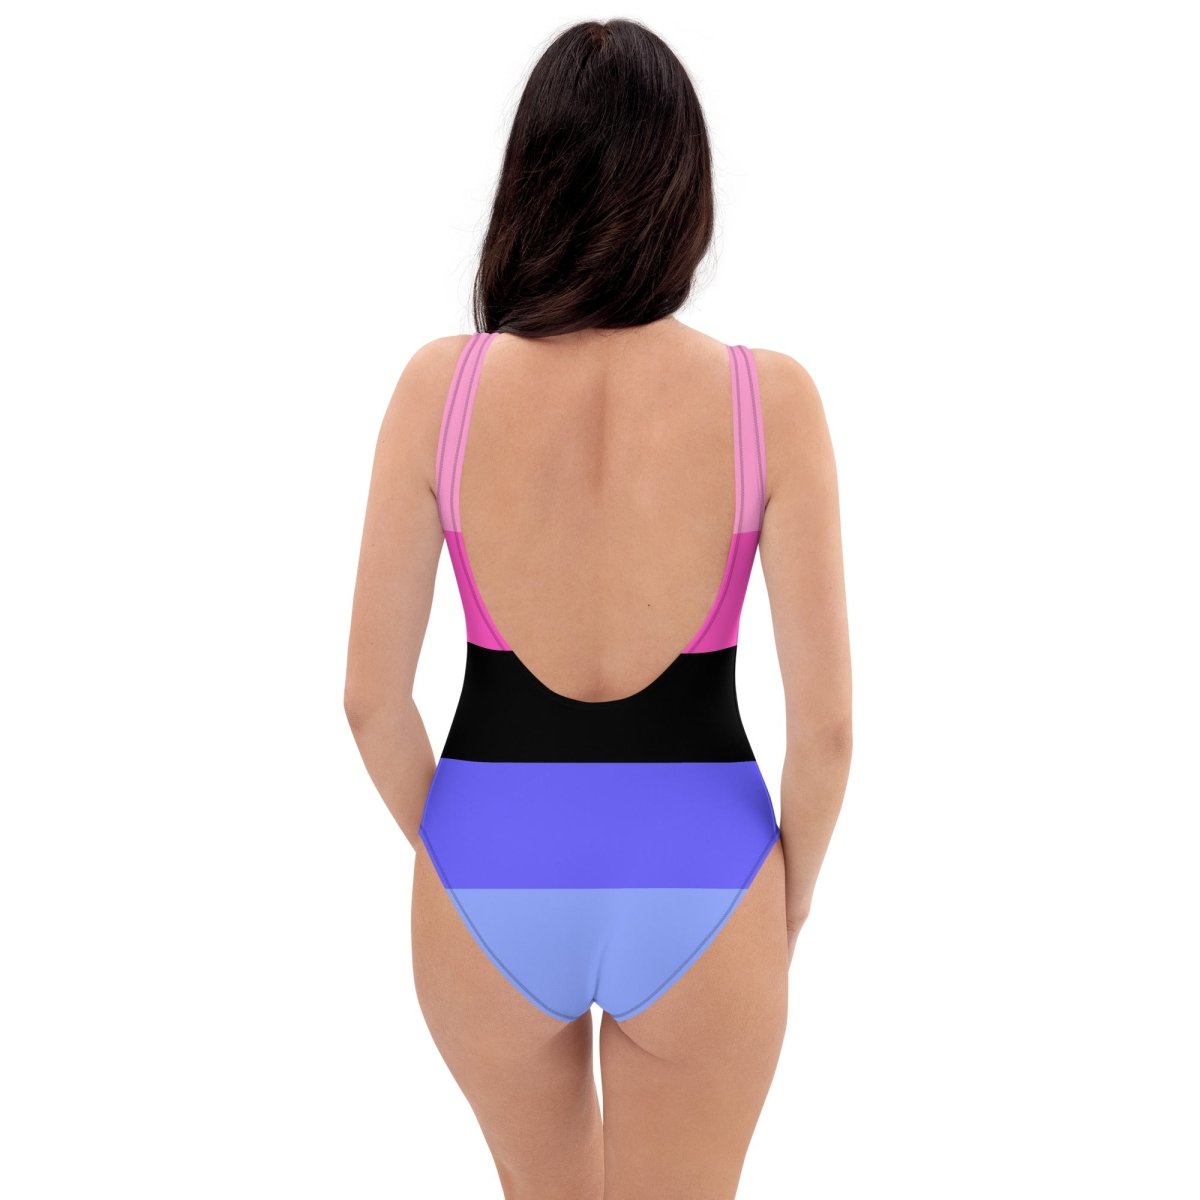 Omnisexual Stripe One-Piece Swimsuit - On Trend Shirts